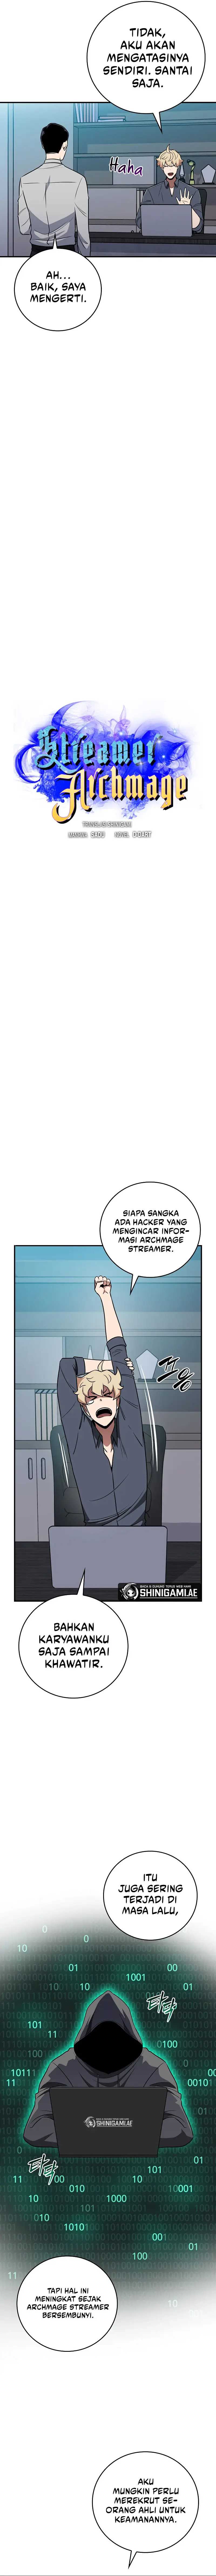 Archmage Streamer Chapter 88